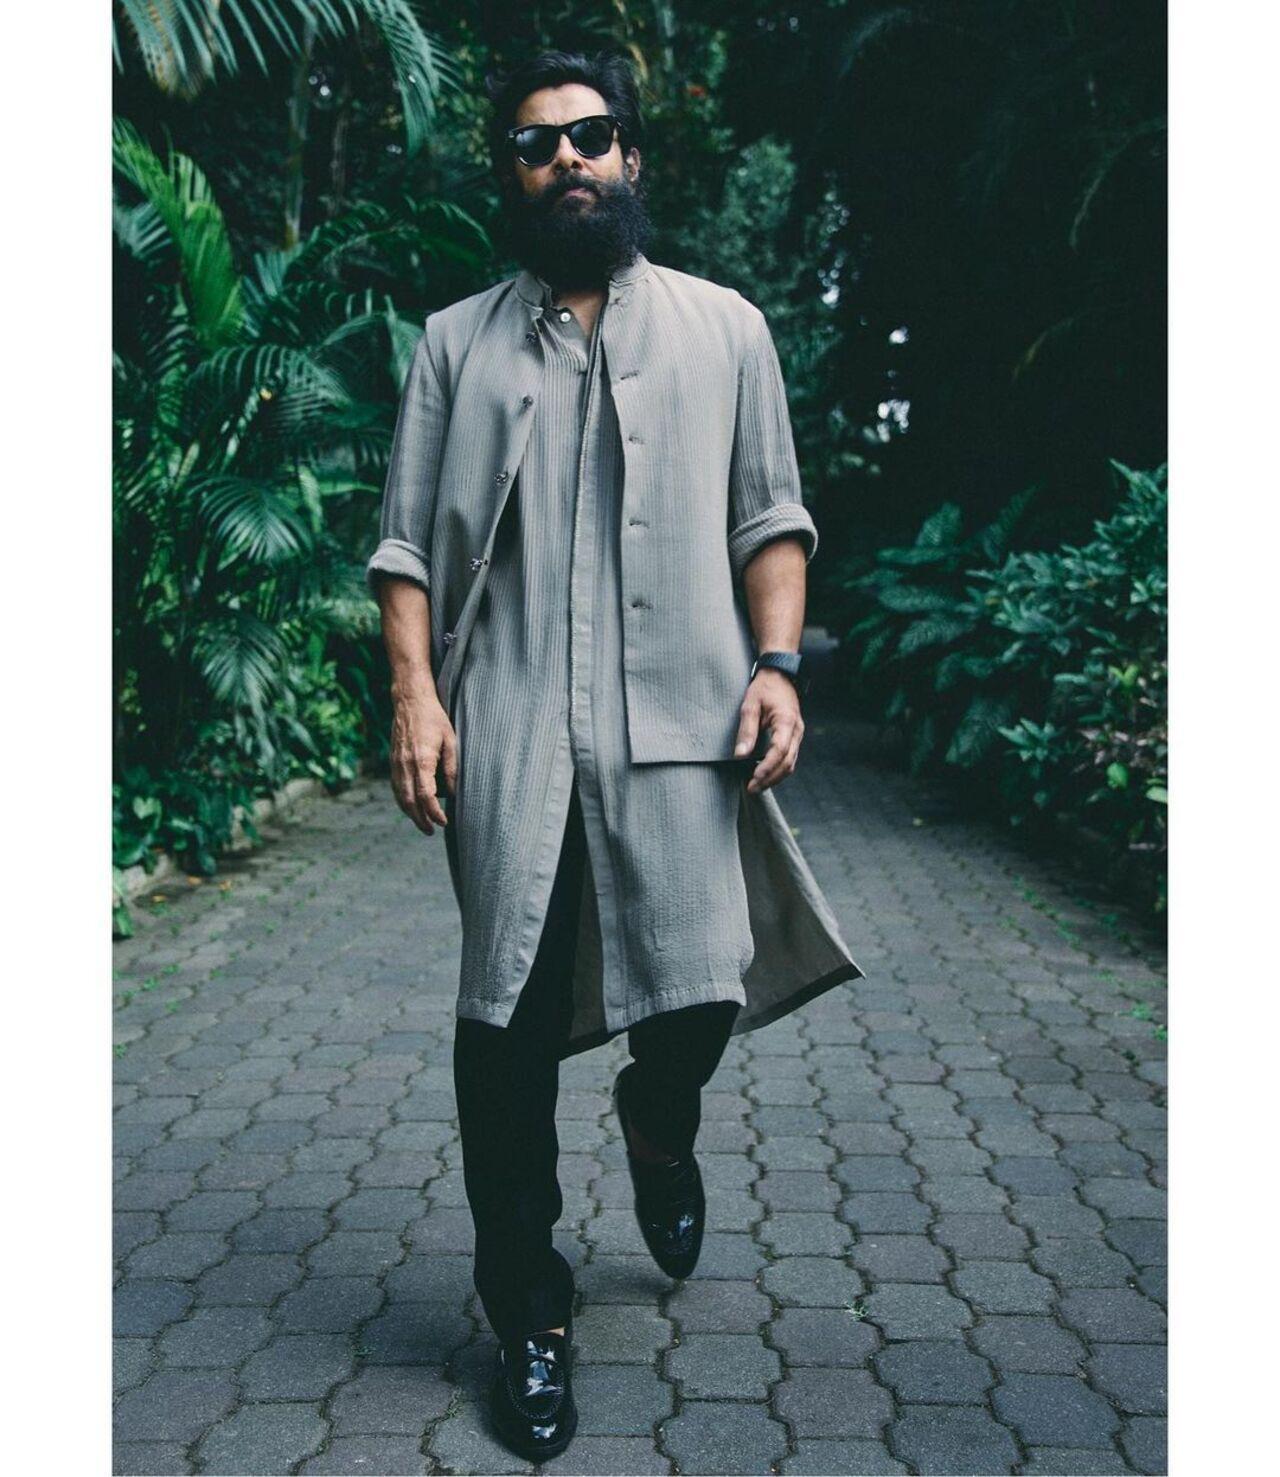 Vikram layers up the traditional look perfect for a close friend's wedding